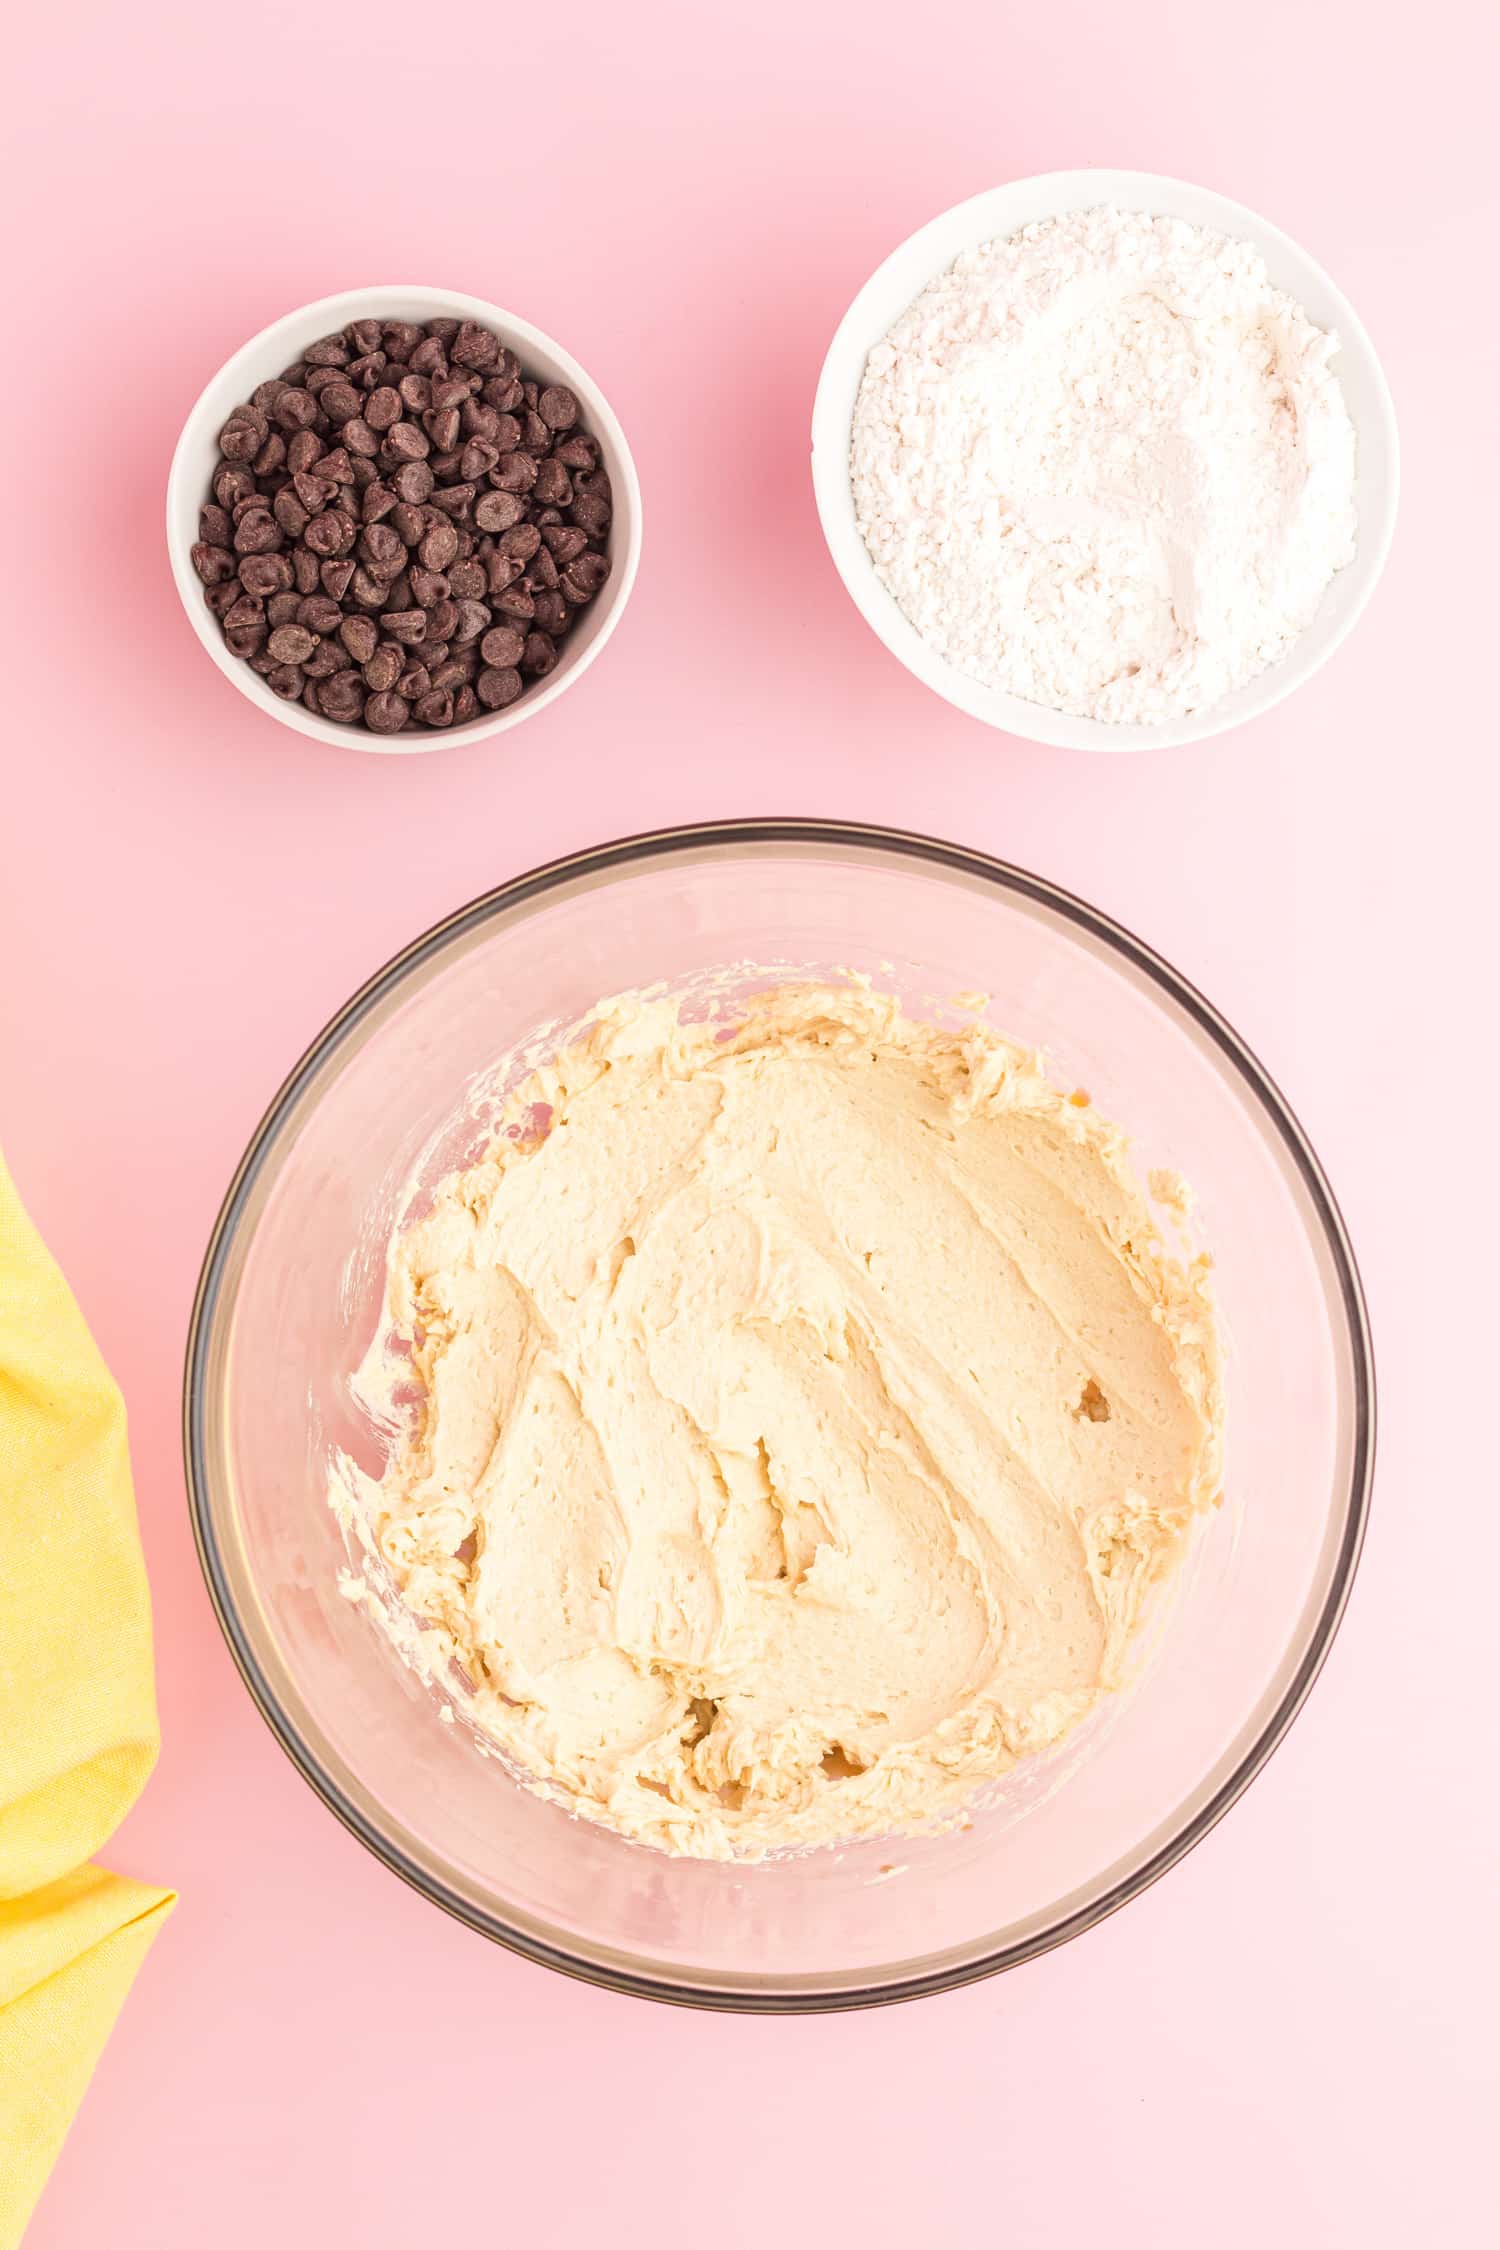 Chocolate chip cookie cake recipe ingredients being combined in mixing bowl